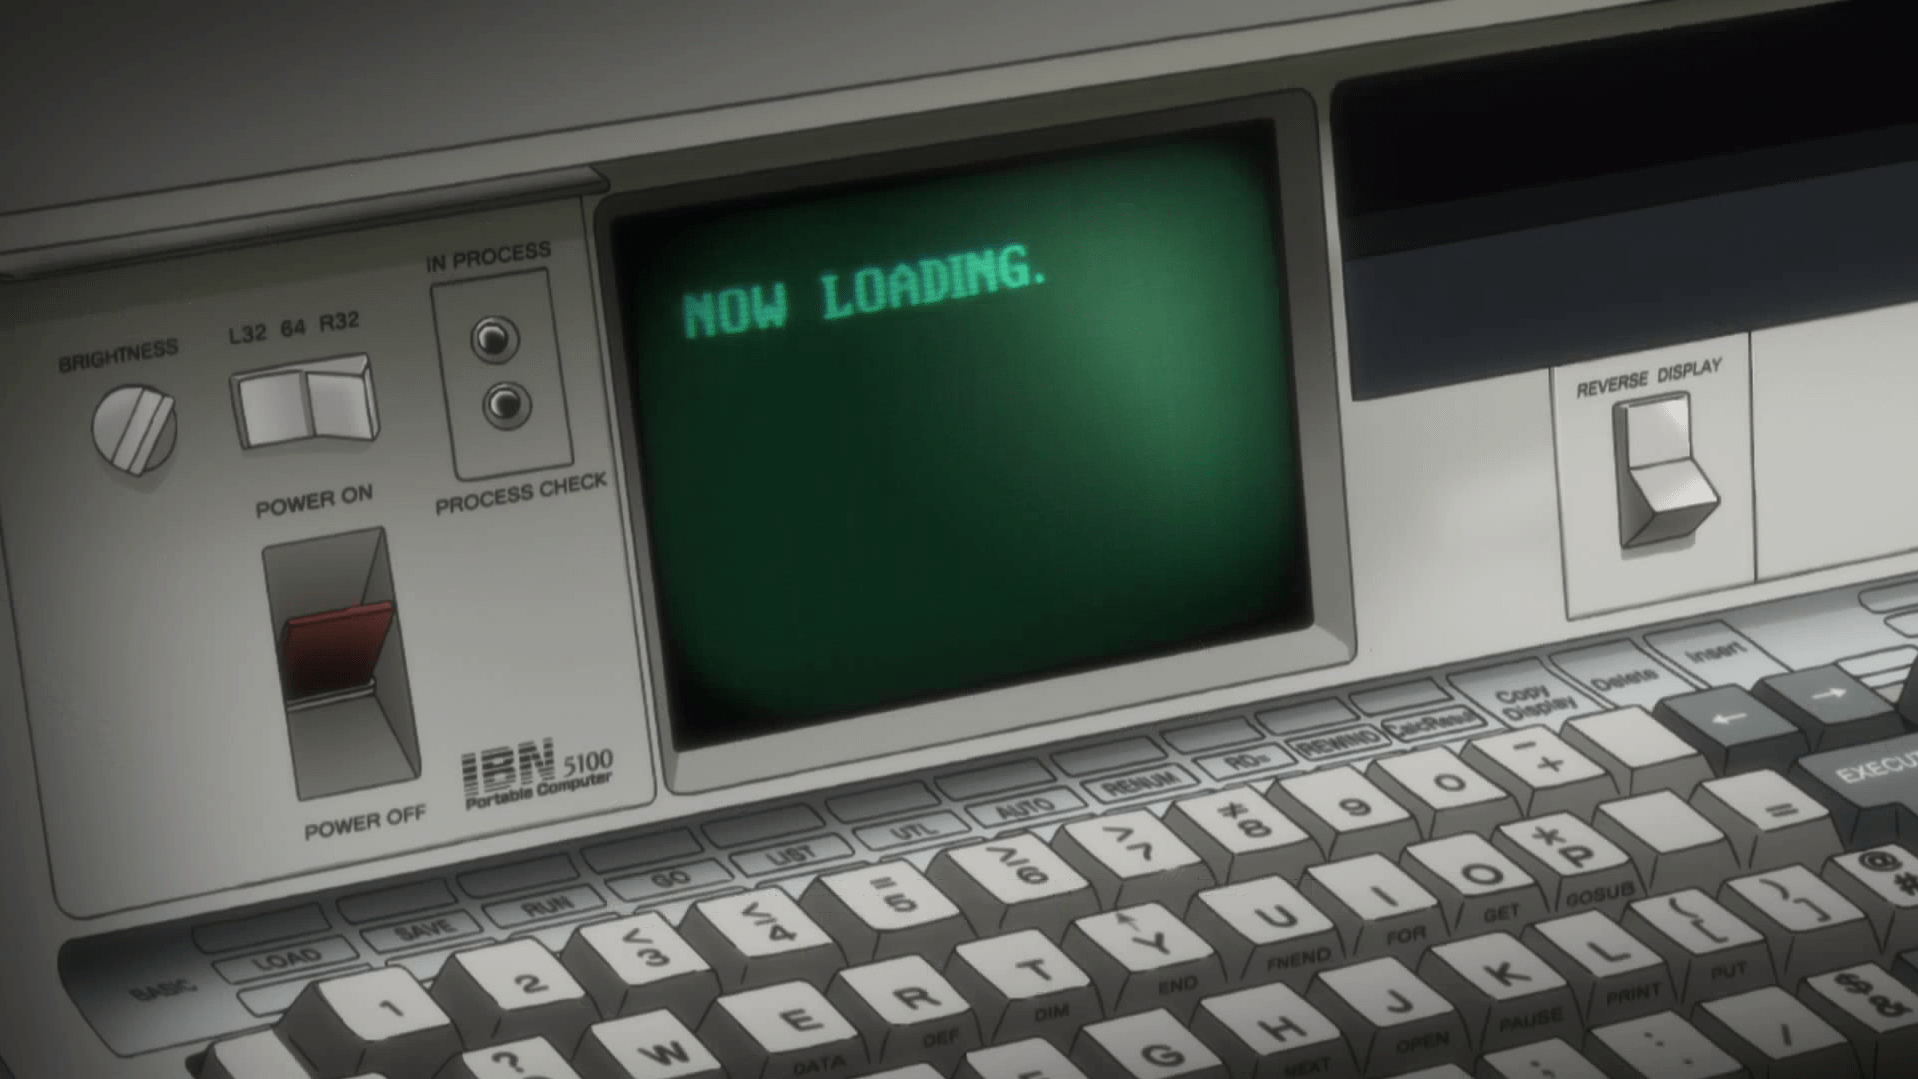 That computer from Steins;Gate